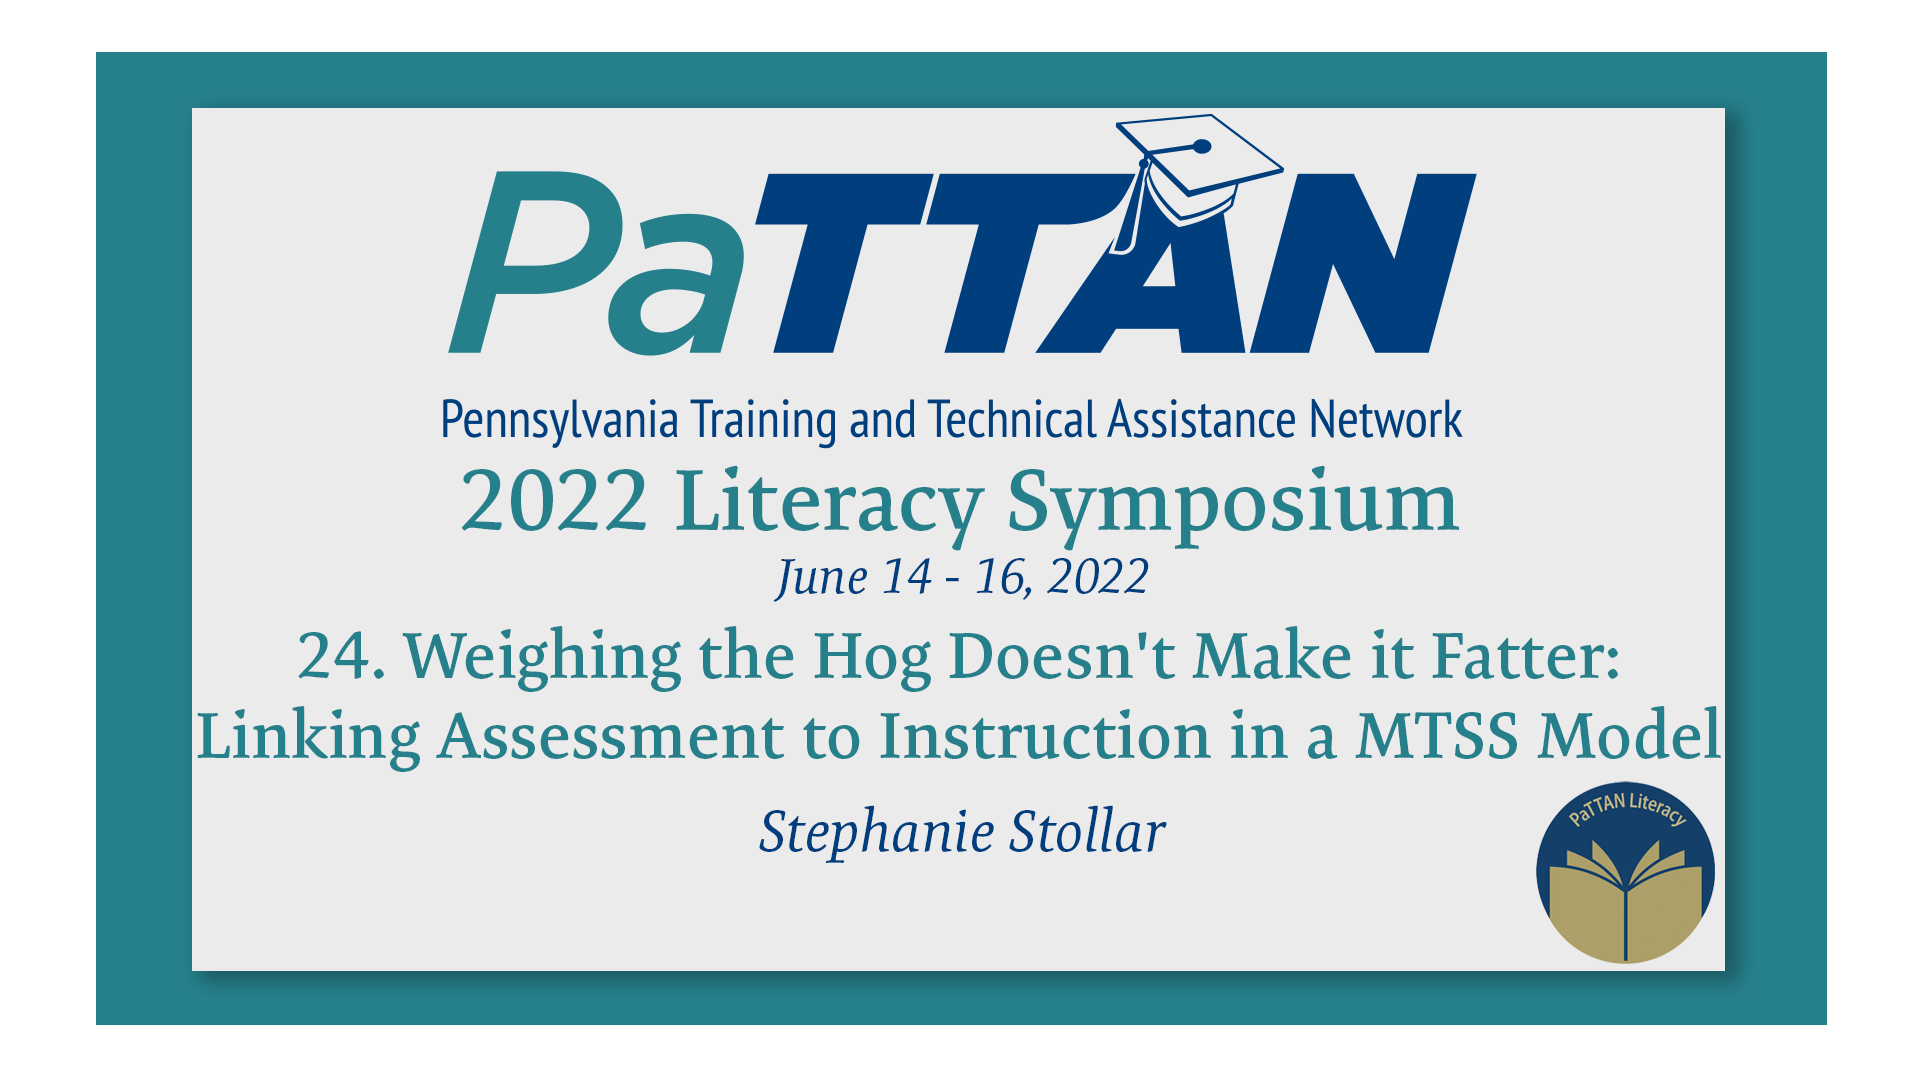 24. Weighing the Hog Doesn't Make it Fatter | 2022 Literacy Symposium